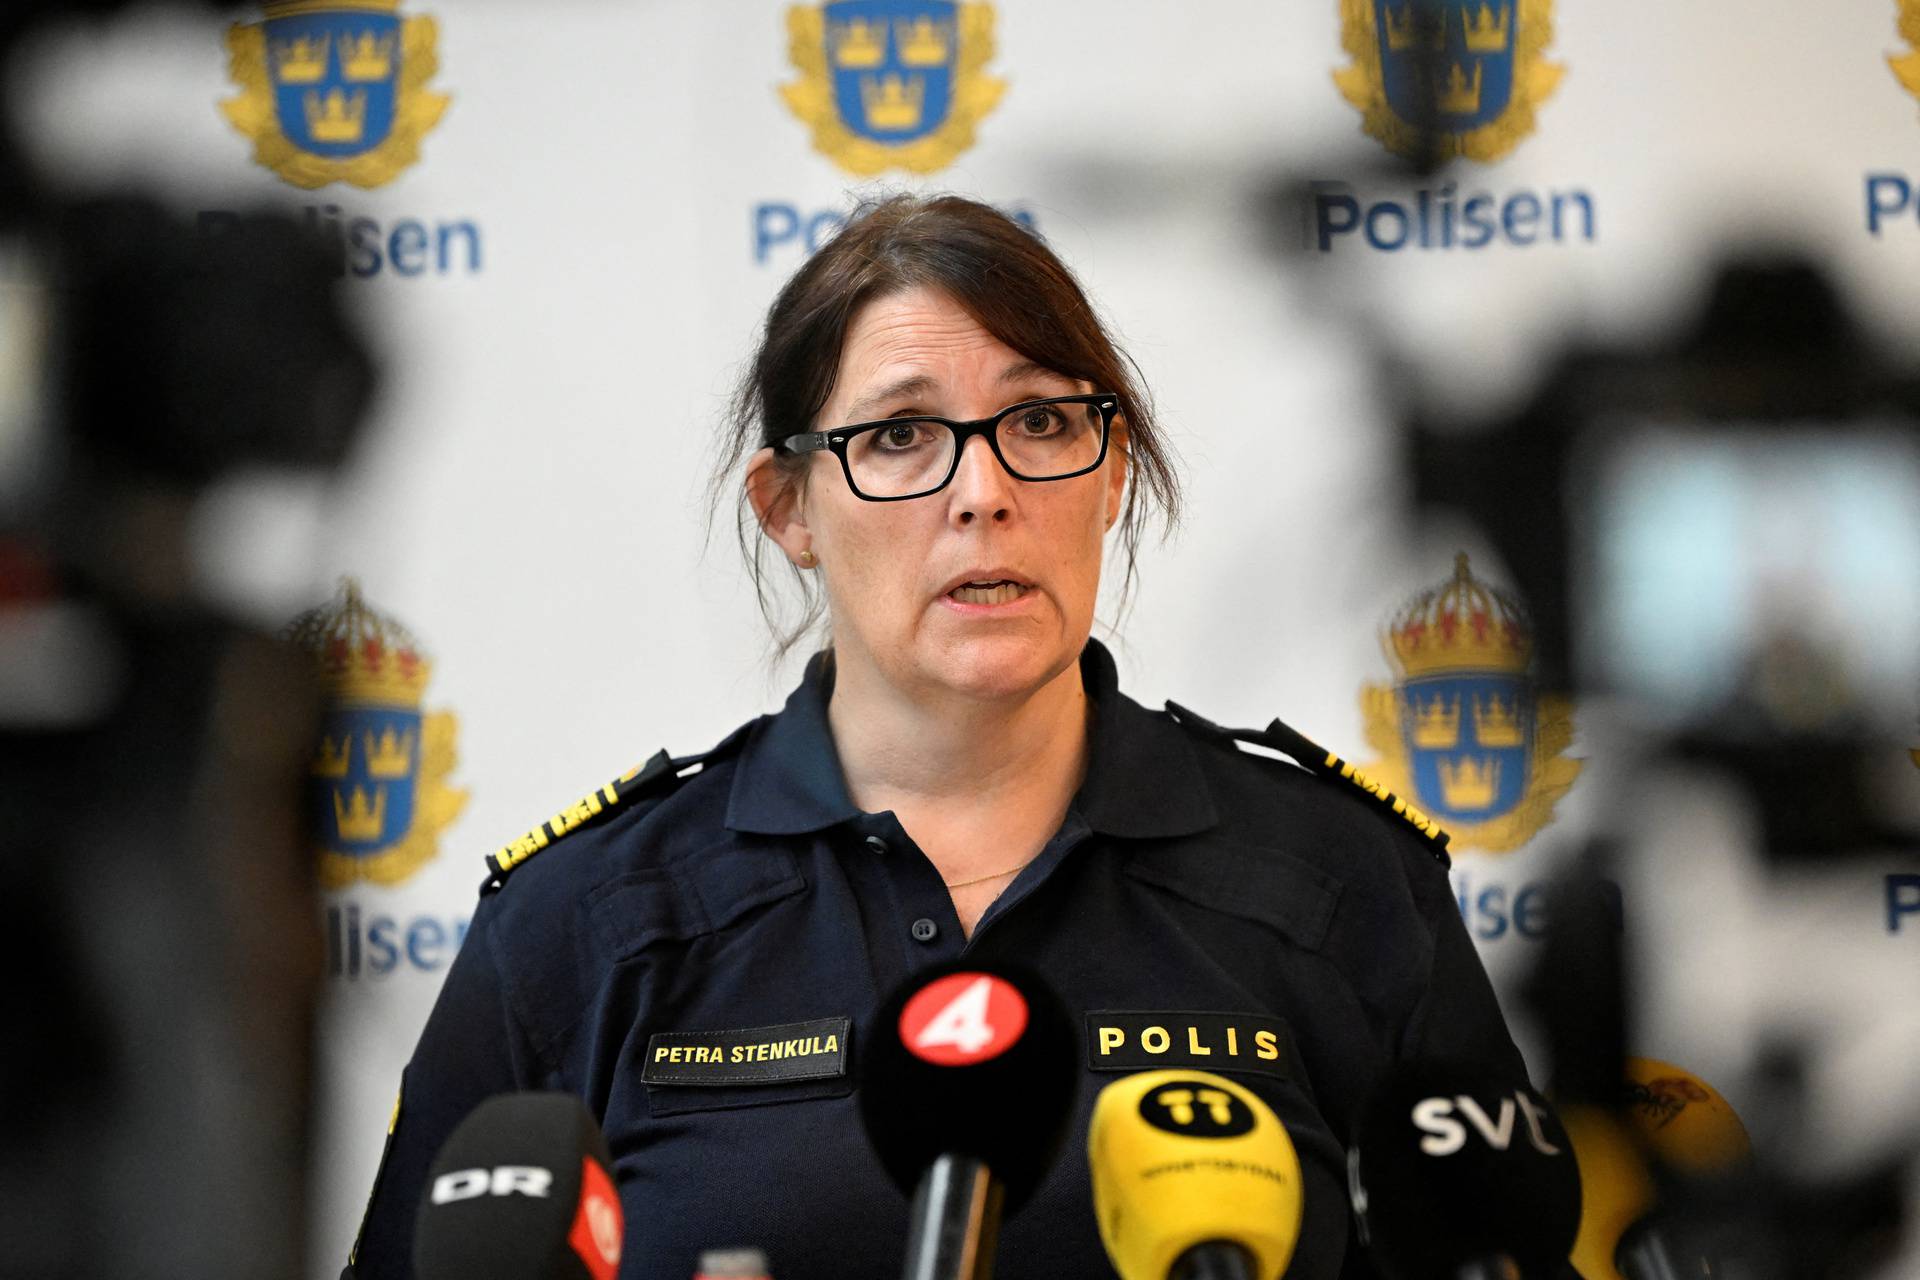 Police chief Petra Stenkula attends a press conference regarding the shooting at Emporia Shopping Center, in Malmo